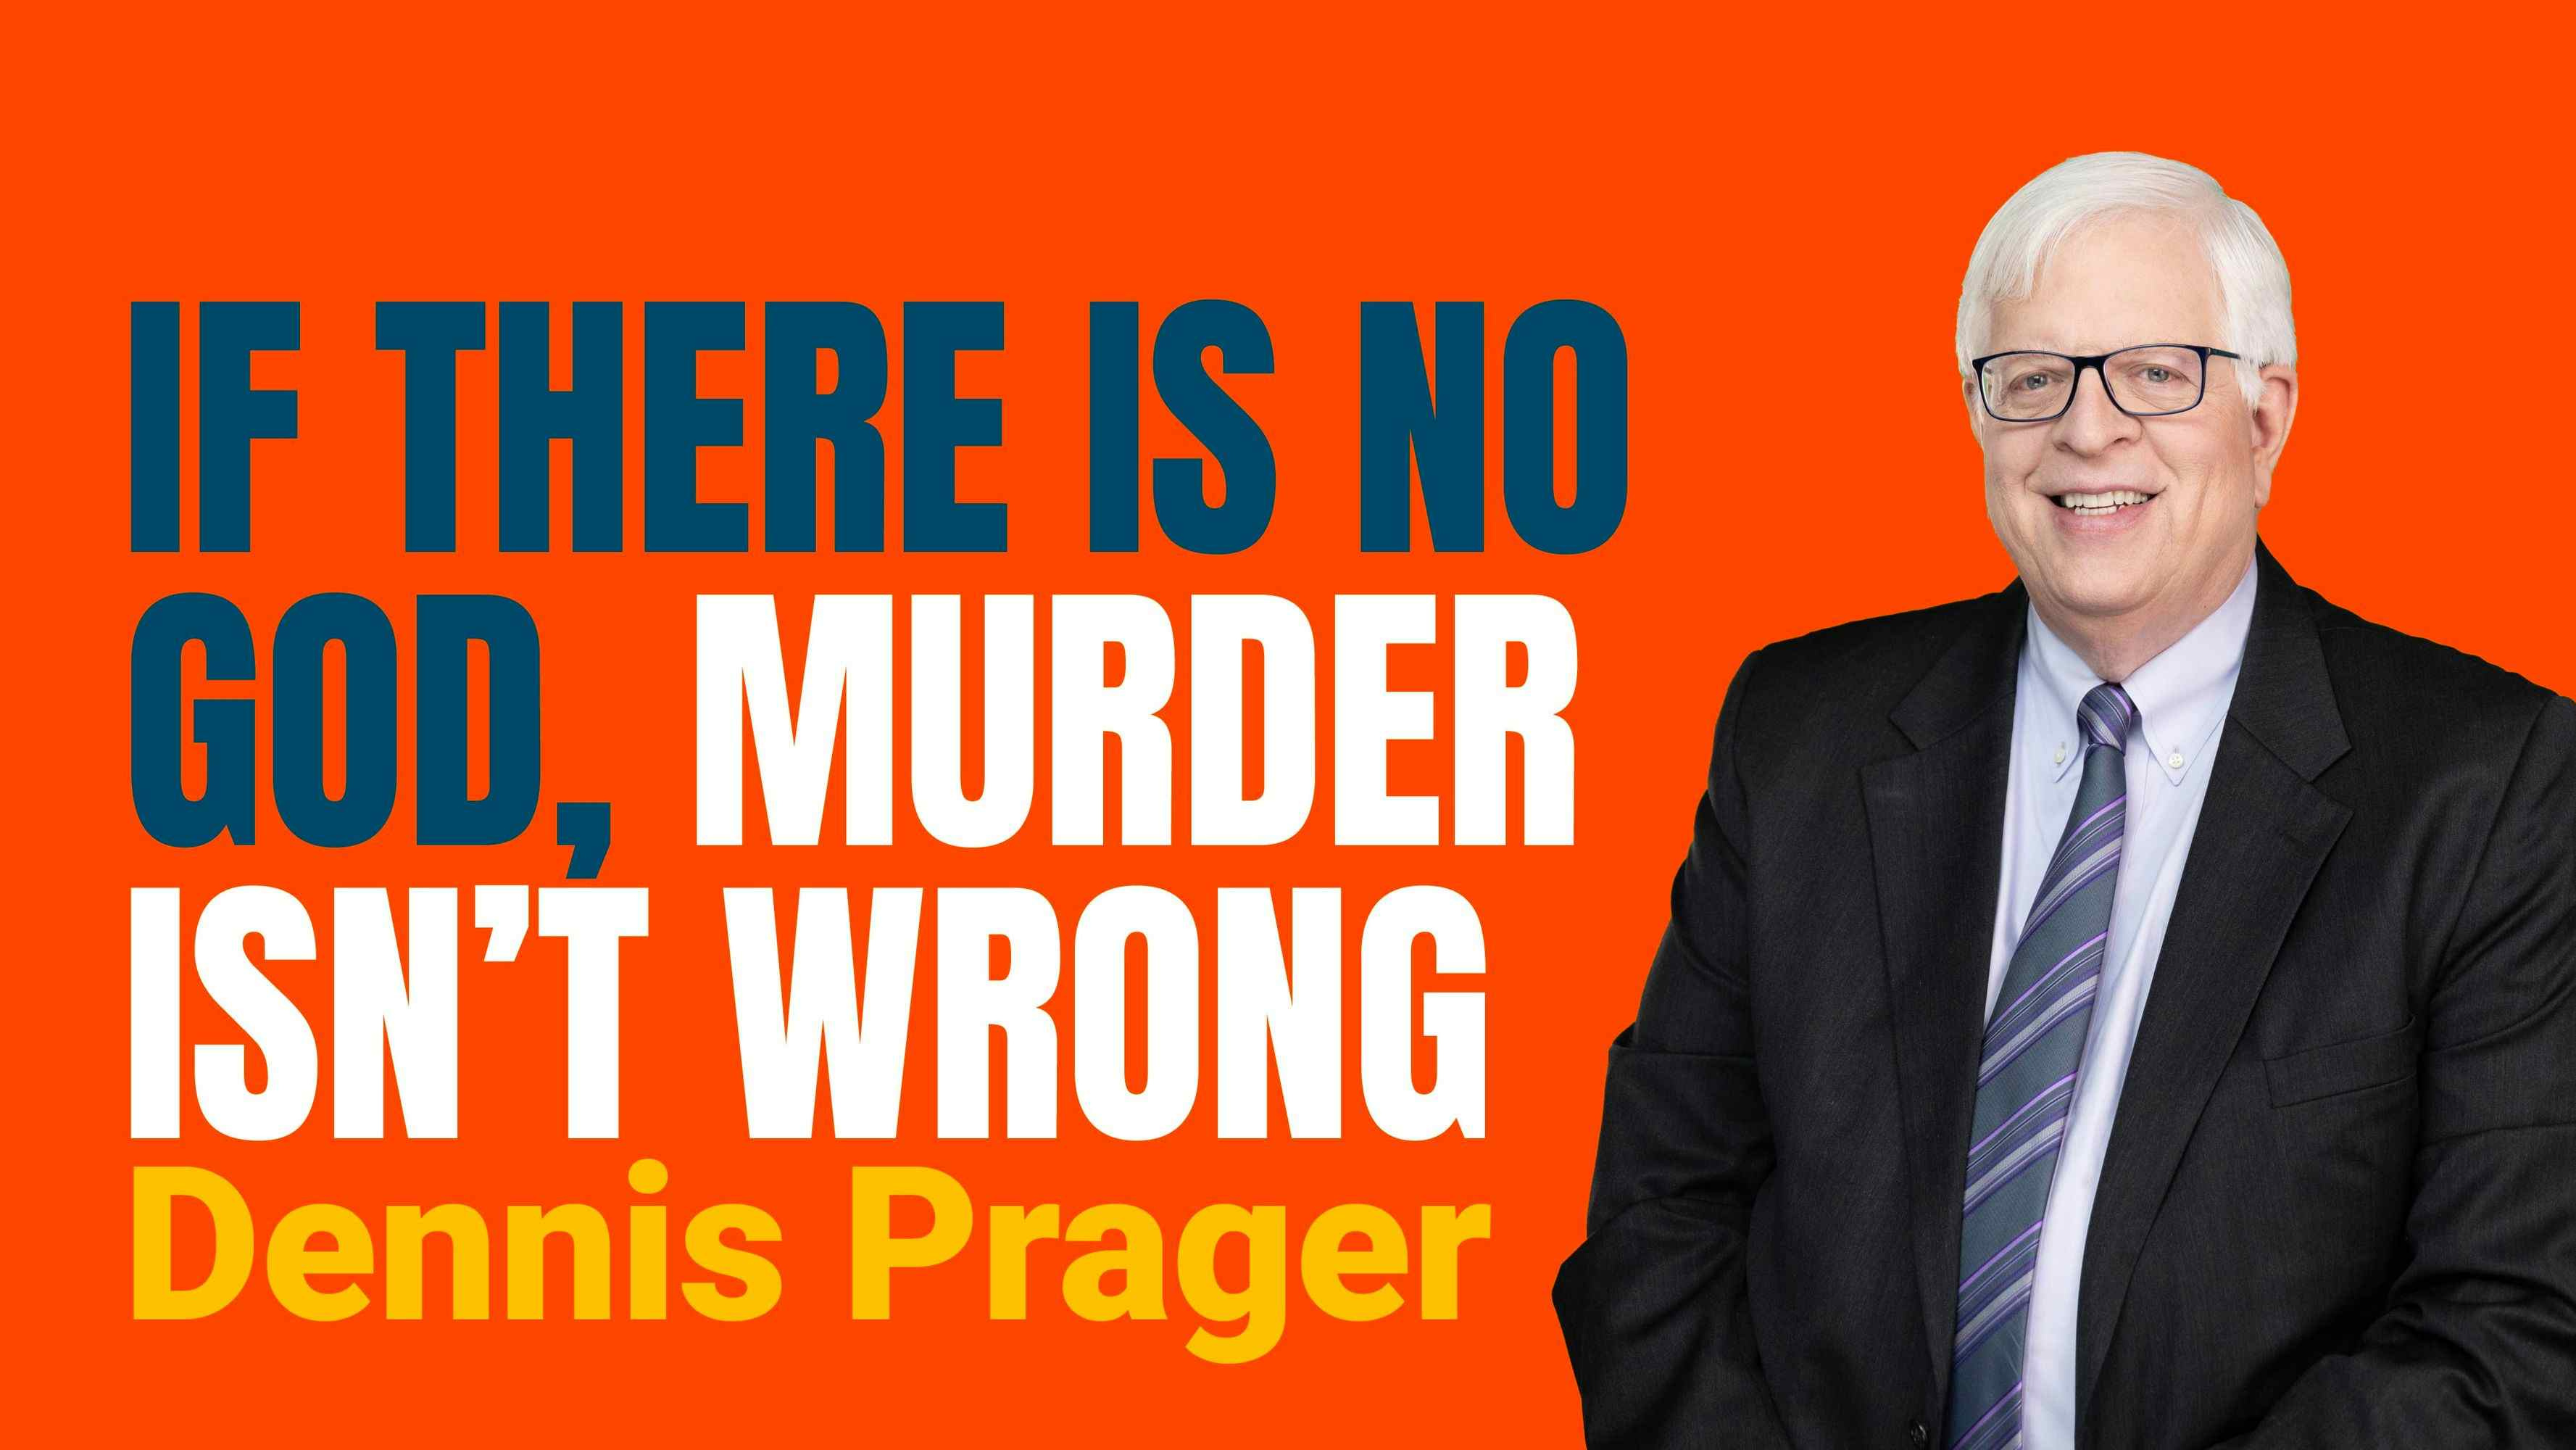 If There Is No God, Murder Isn't Wrong